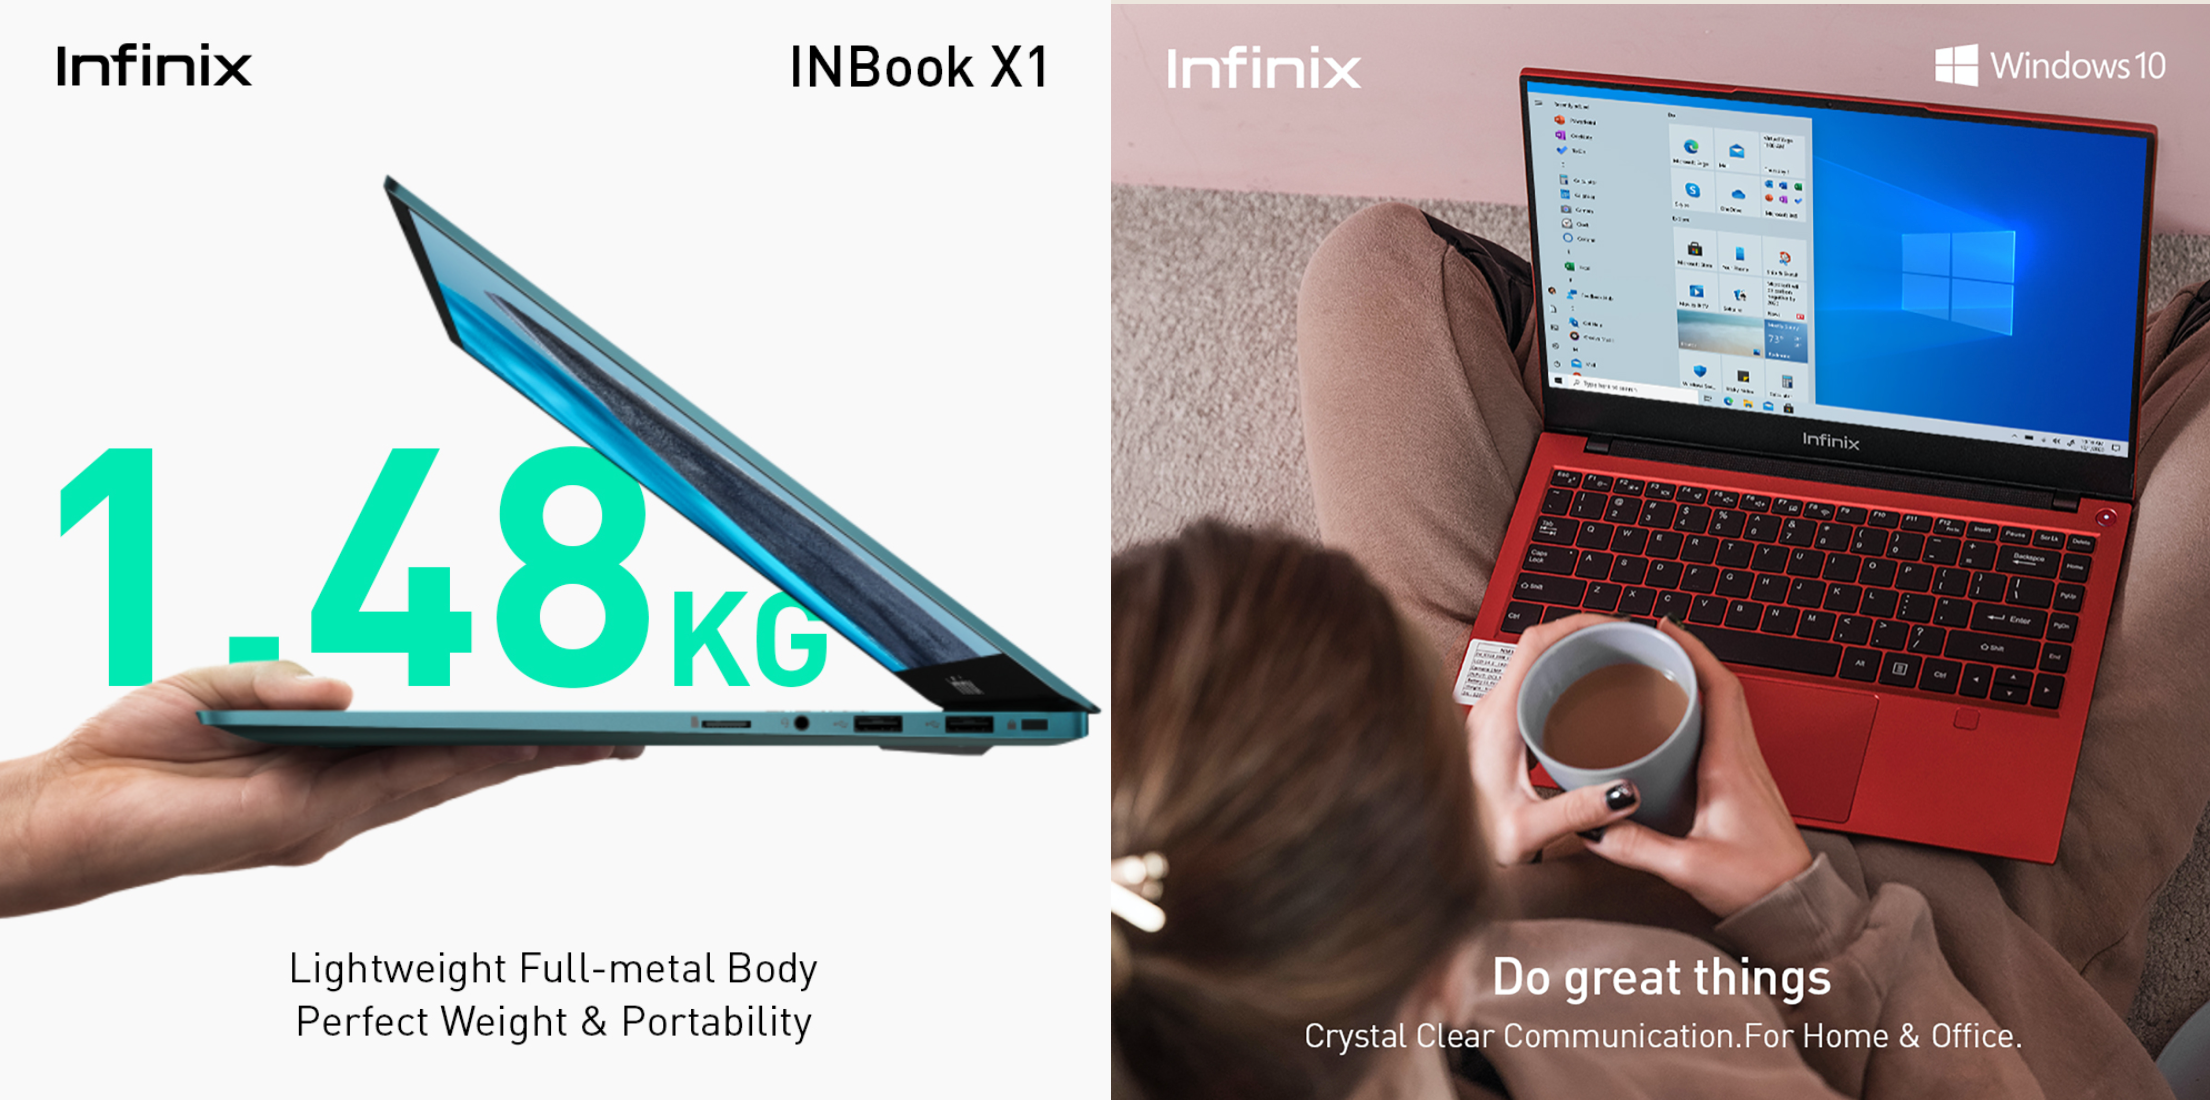 Infinix inbook x1 is a 14 inch lightweight laptop with only 1. 48kg total.